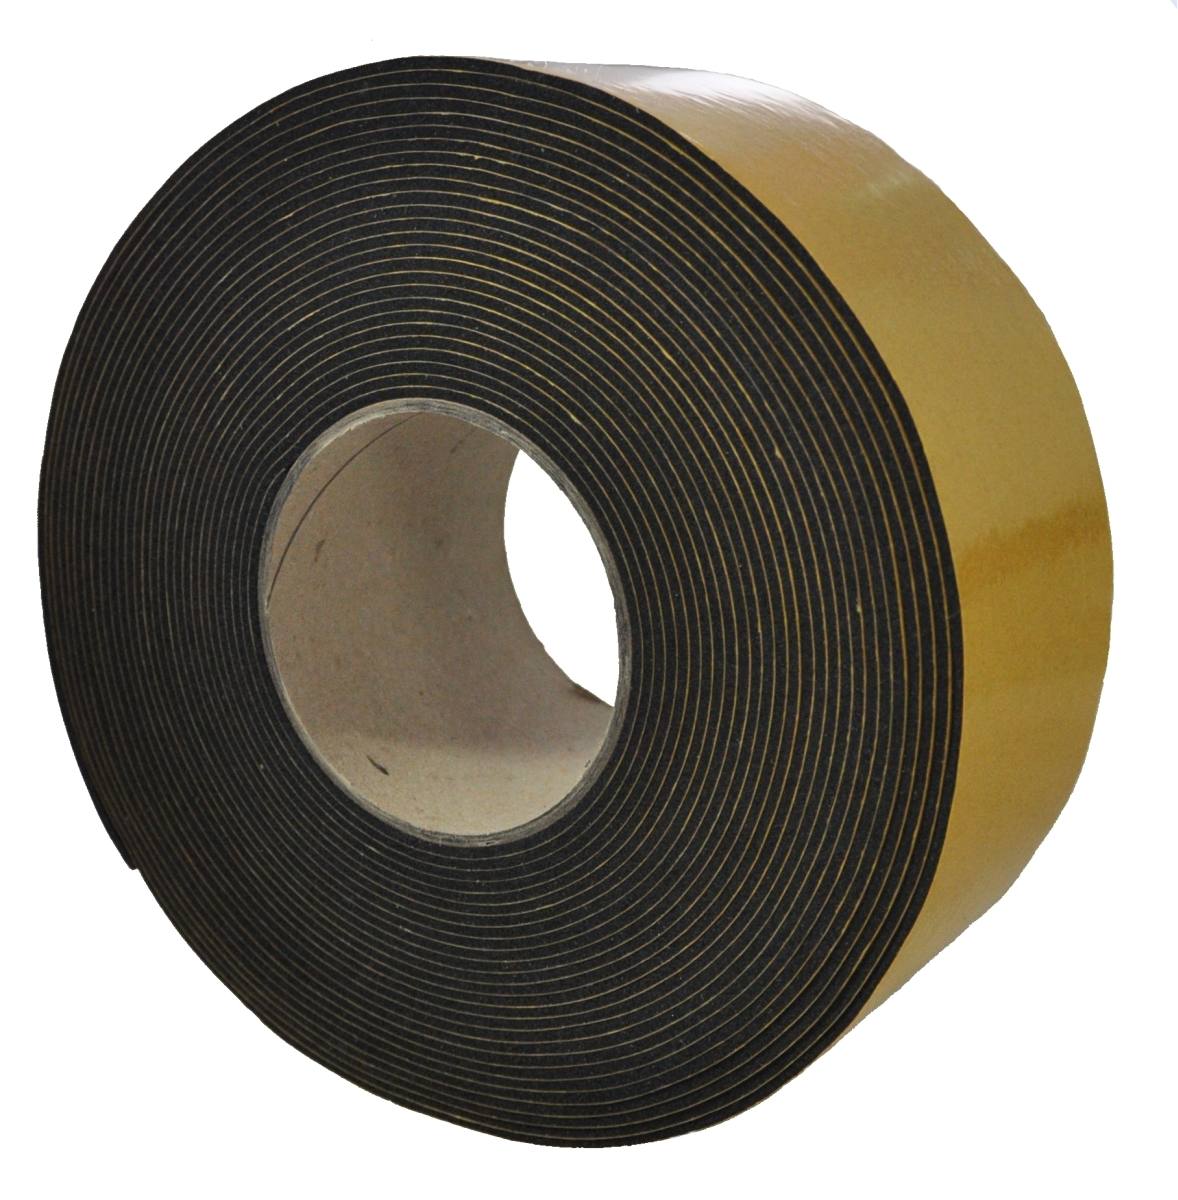 S-K-S EPDM 6mmx12mmx10m black self-adhesive on one side